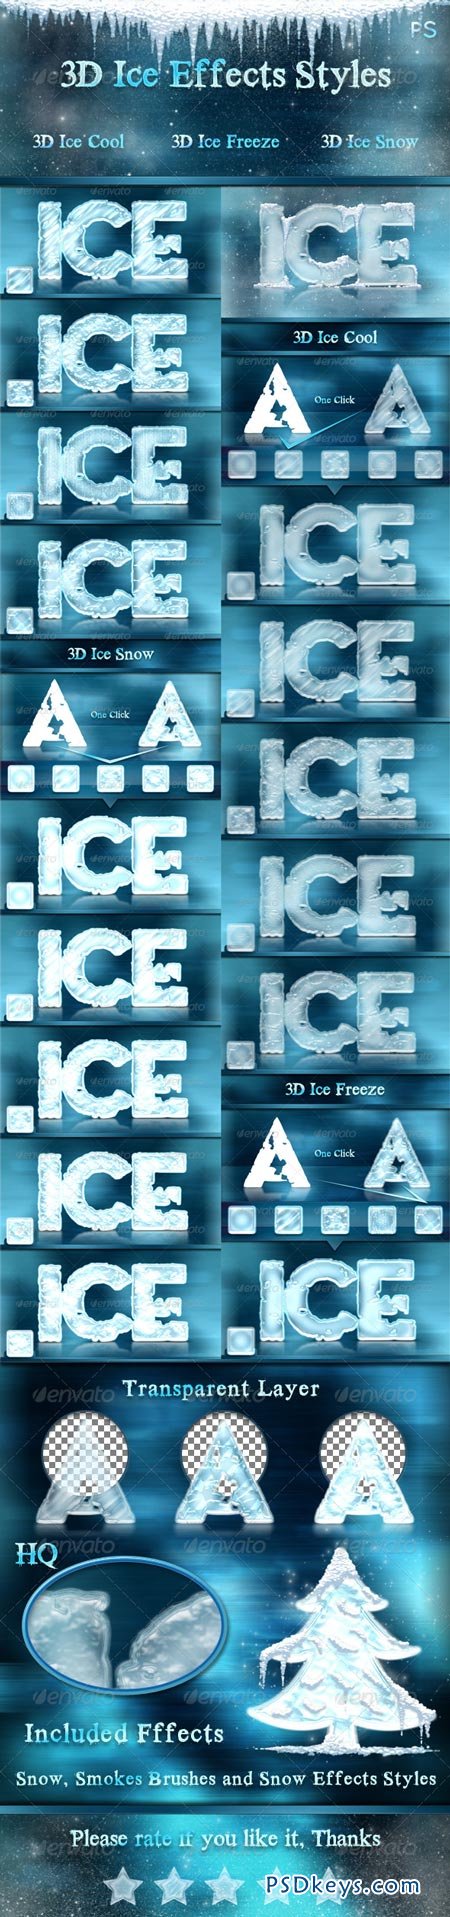 3D Ice Cool, Freeze & Snow Effects Styles 6500617